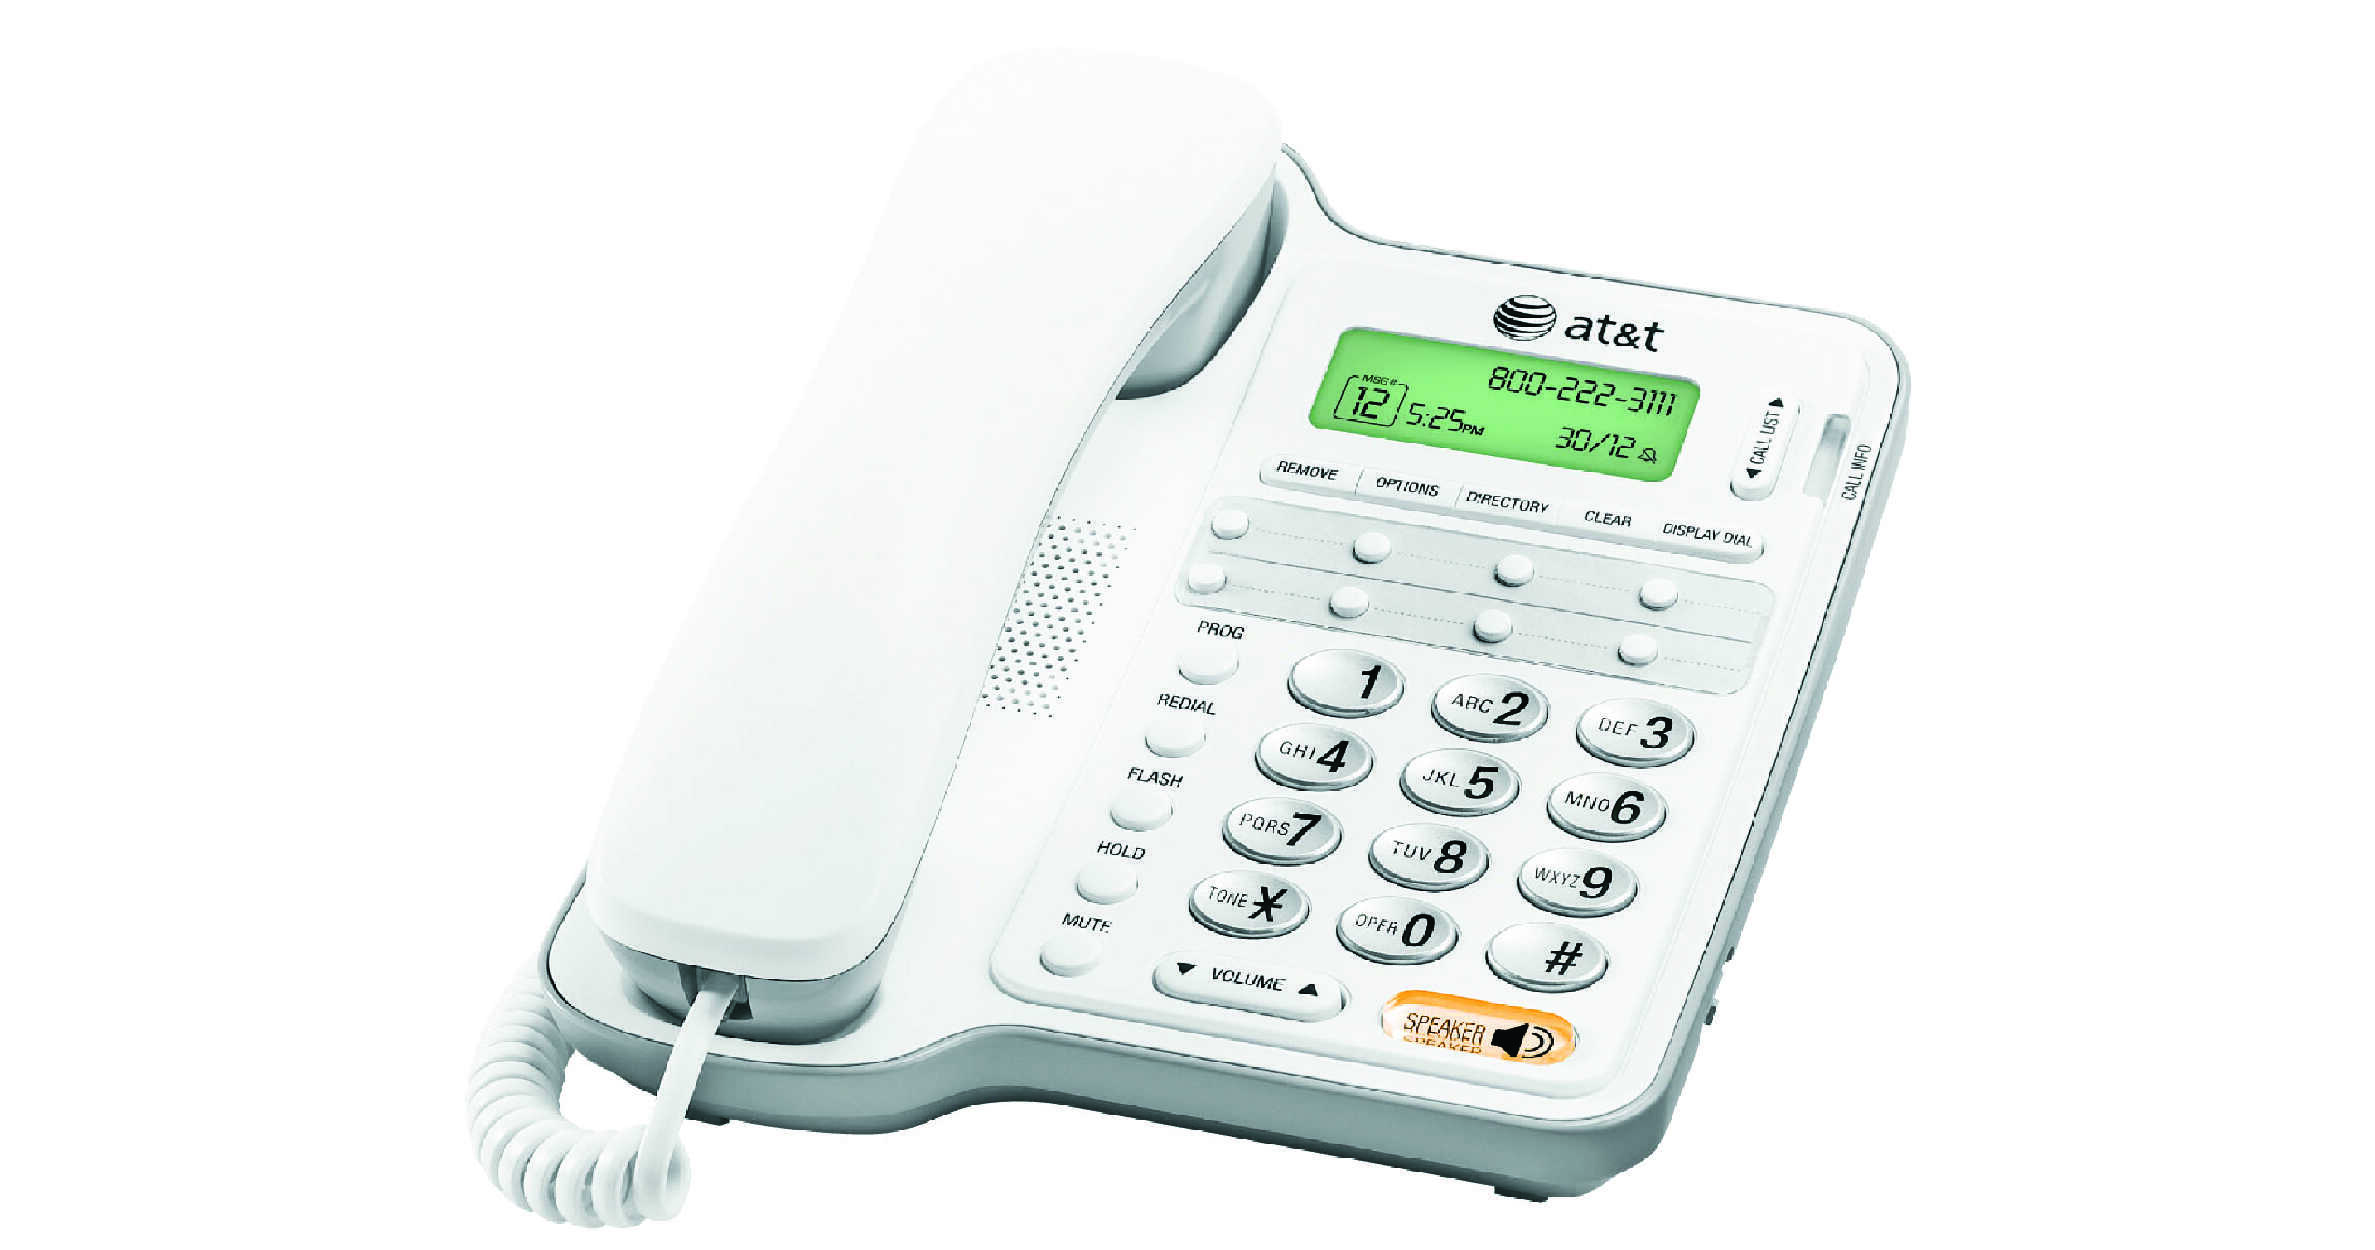 AT&T CL2909 Corded phone